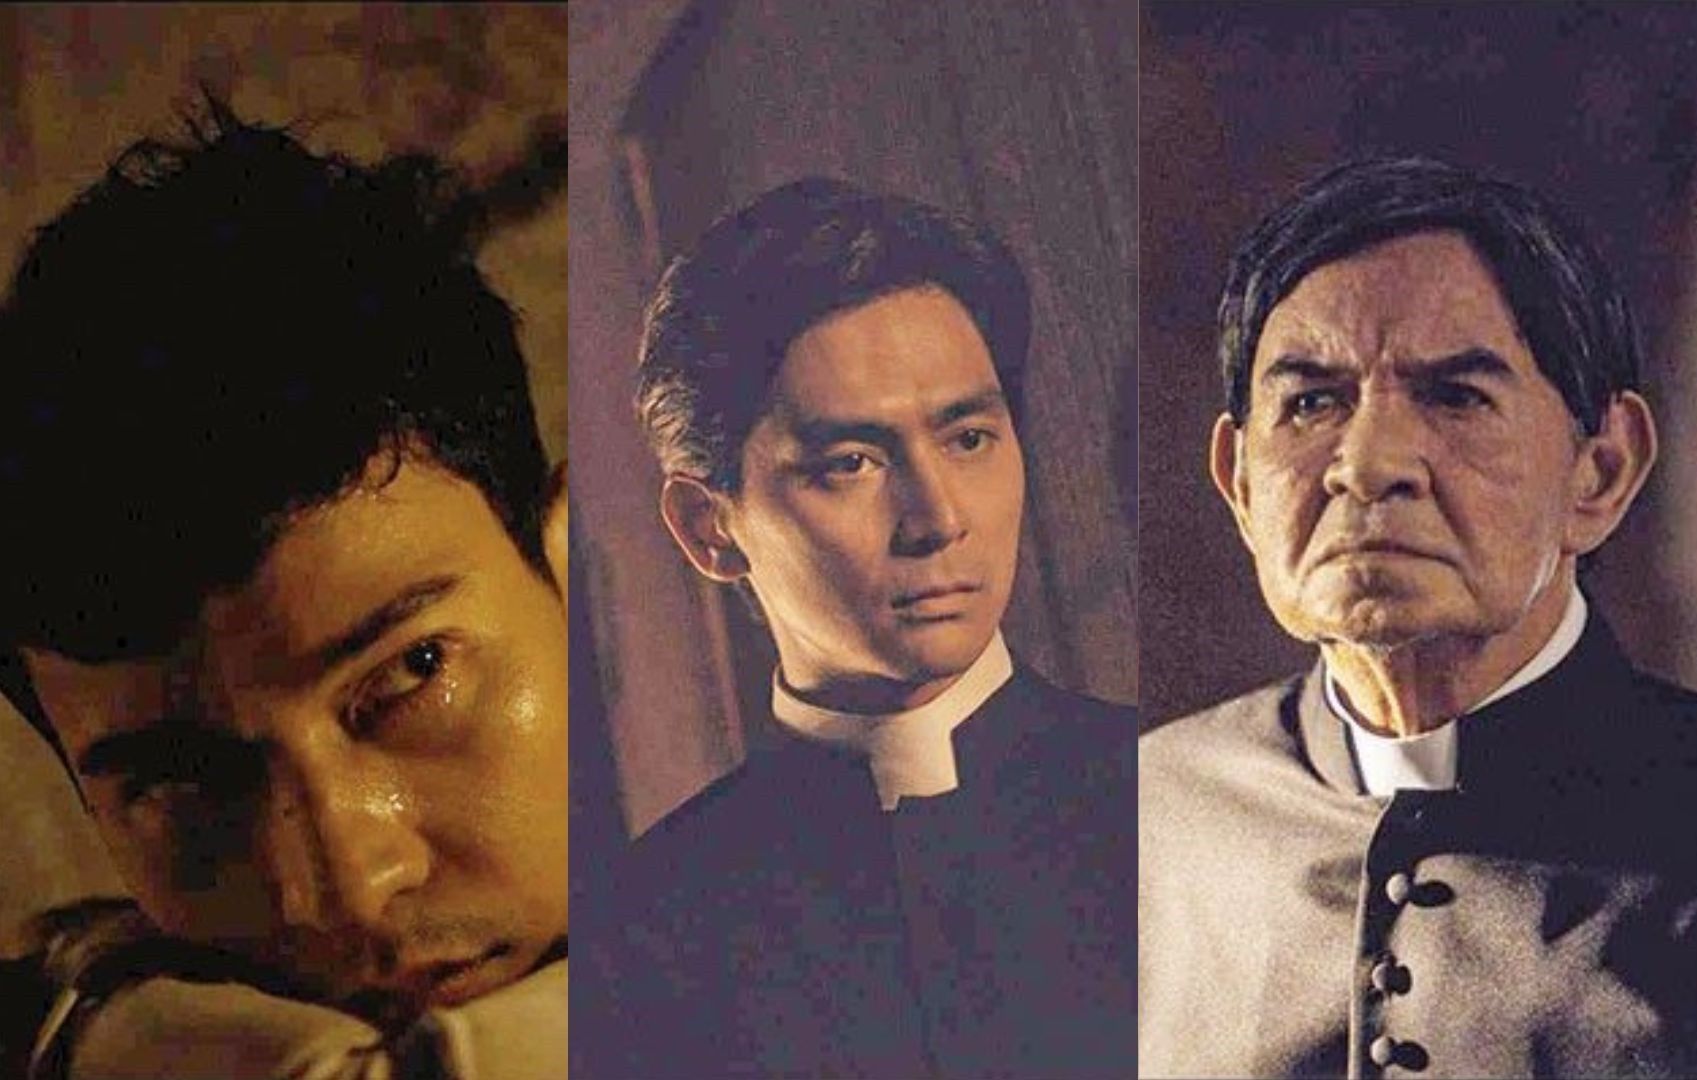 'GomBurZa' review: Empowering tribute to Filipino martyrs